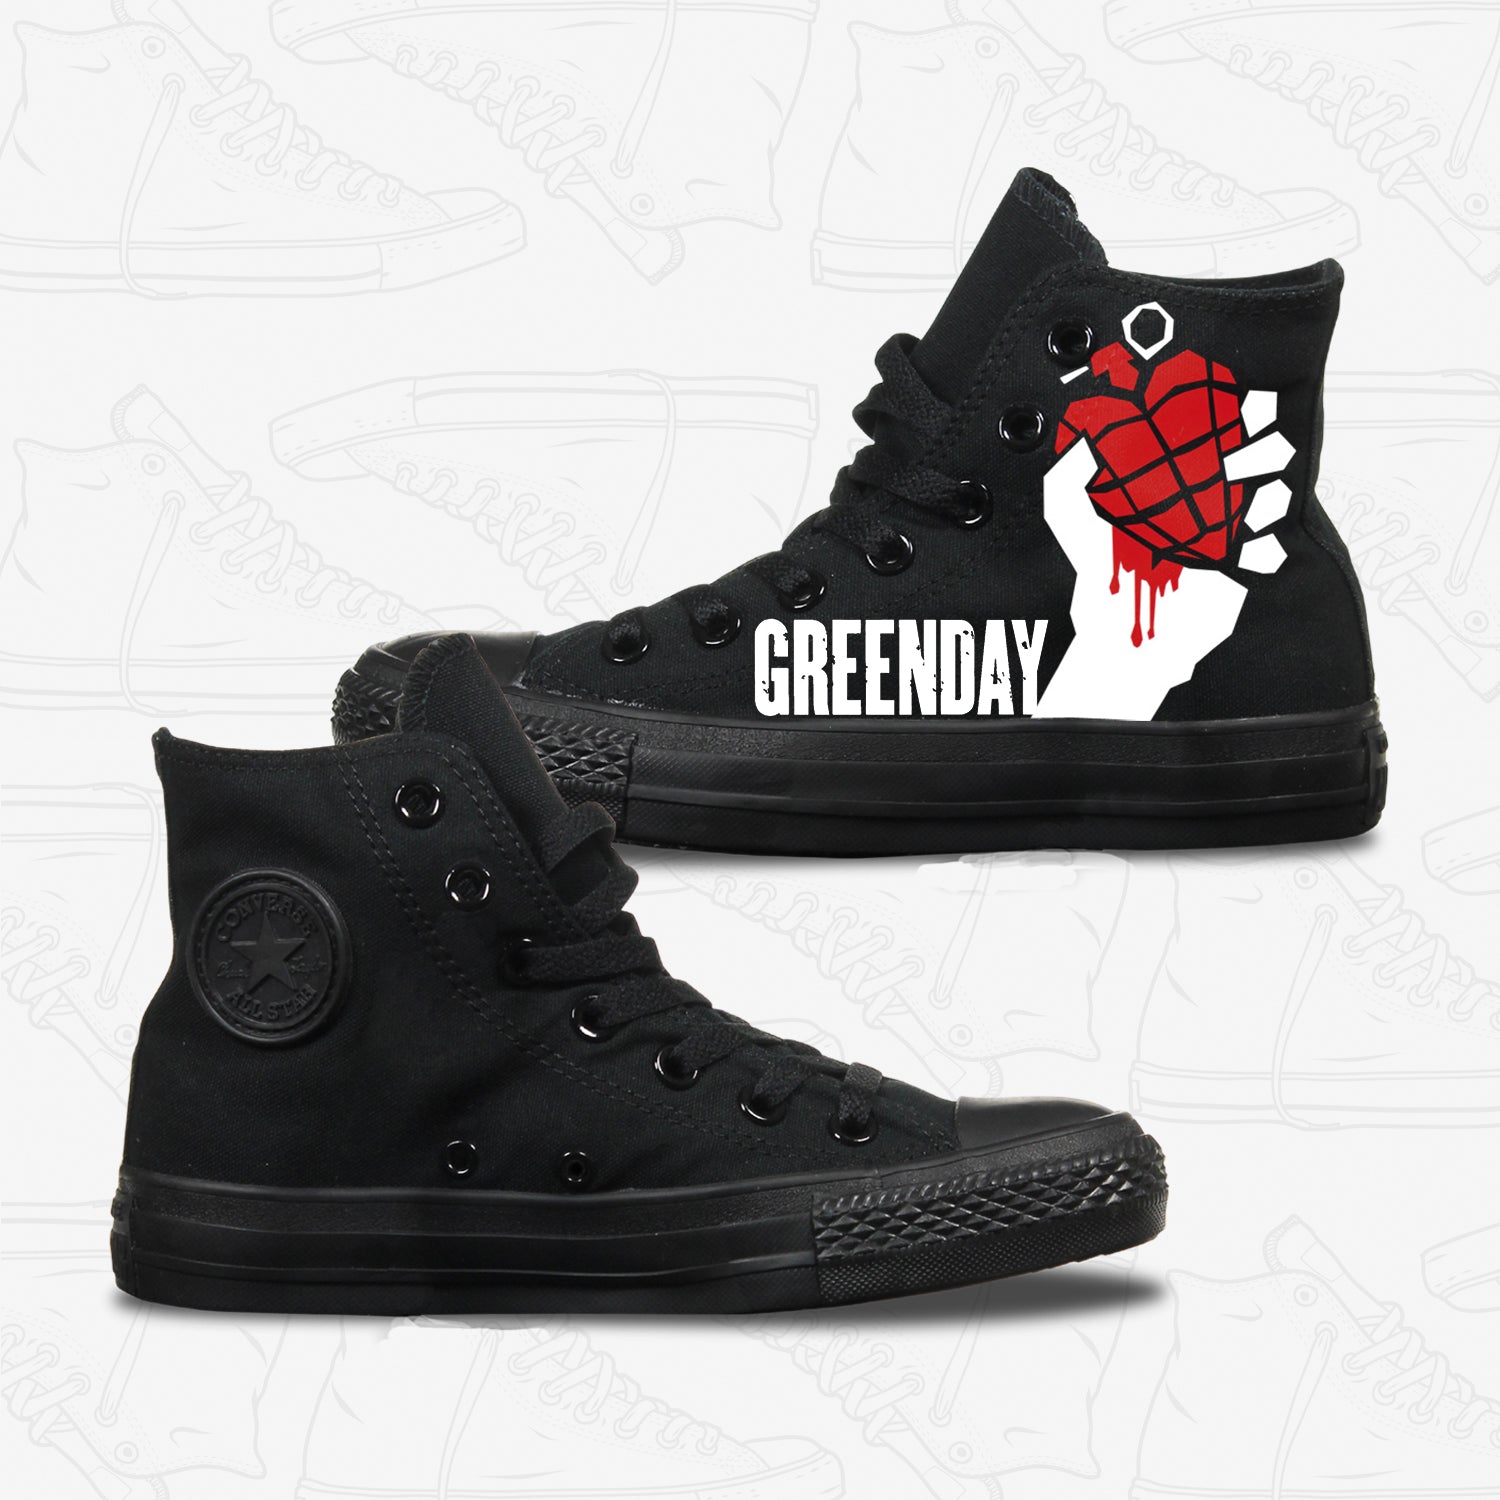 Green Day Adult Converse Shoes